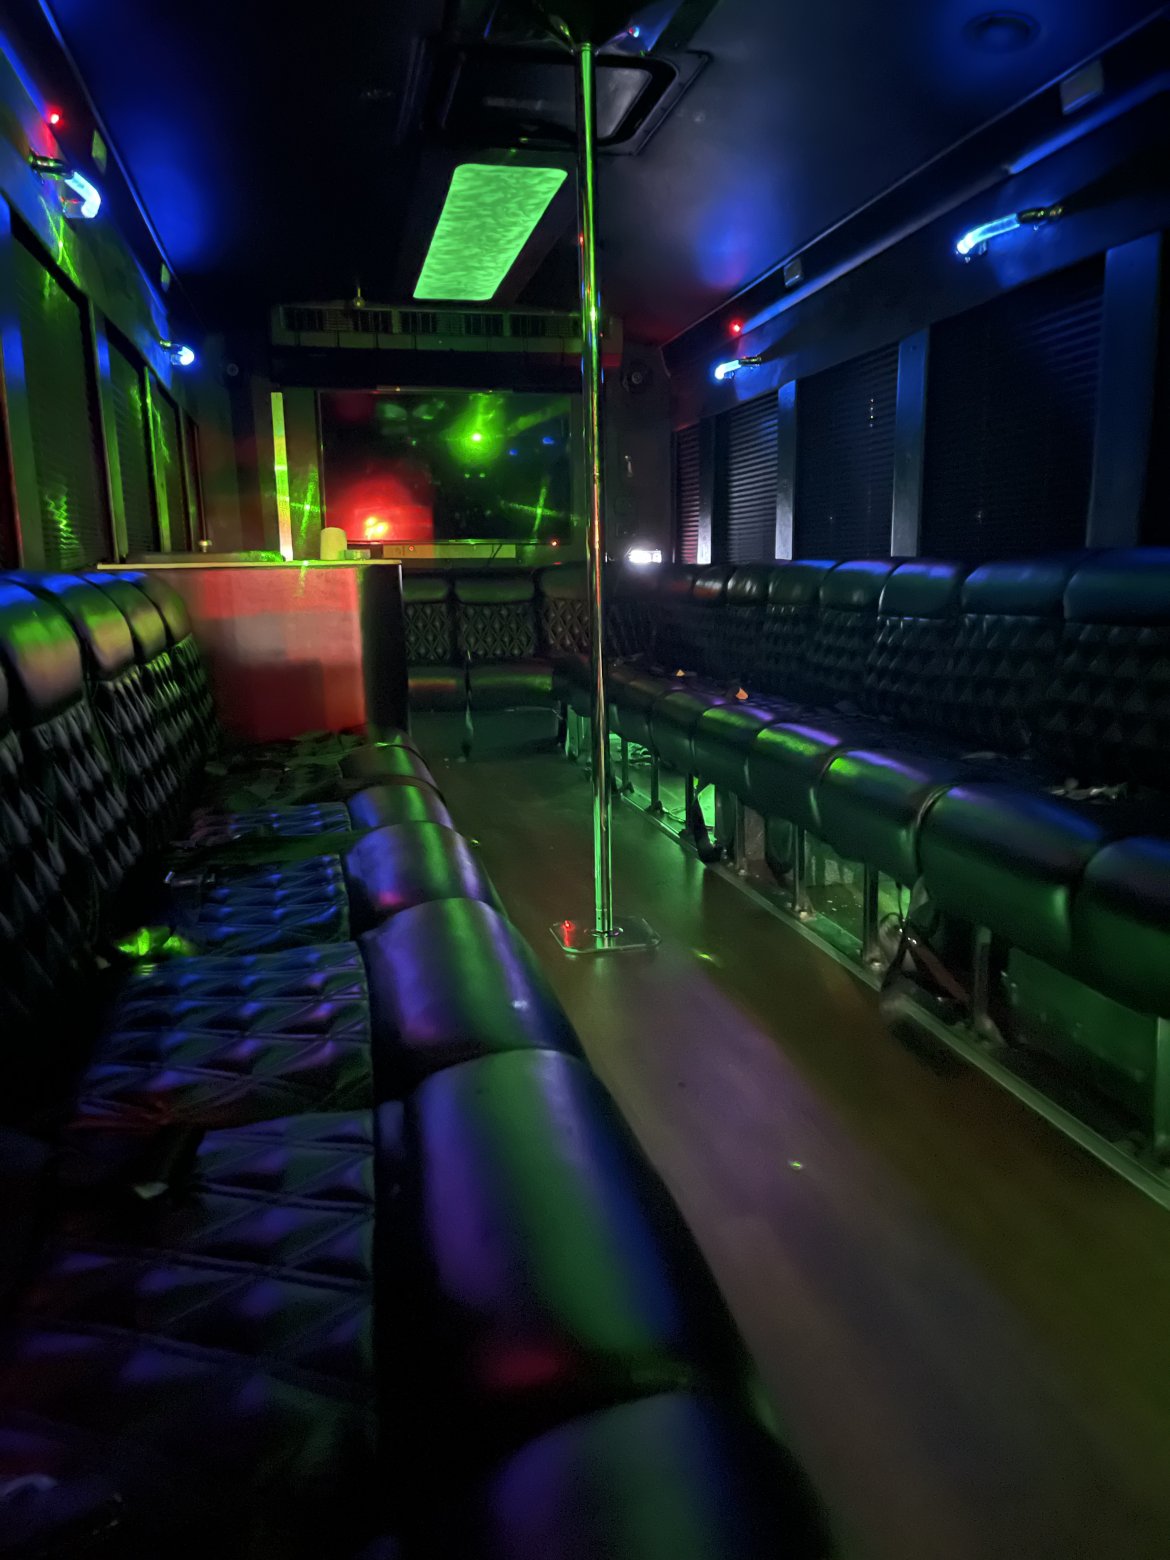 Limo Bus for sale: 2014 International Ic corporation ac